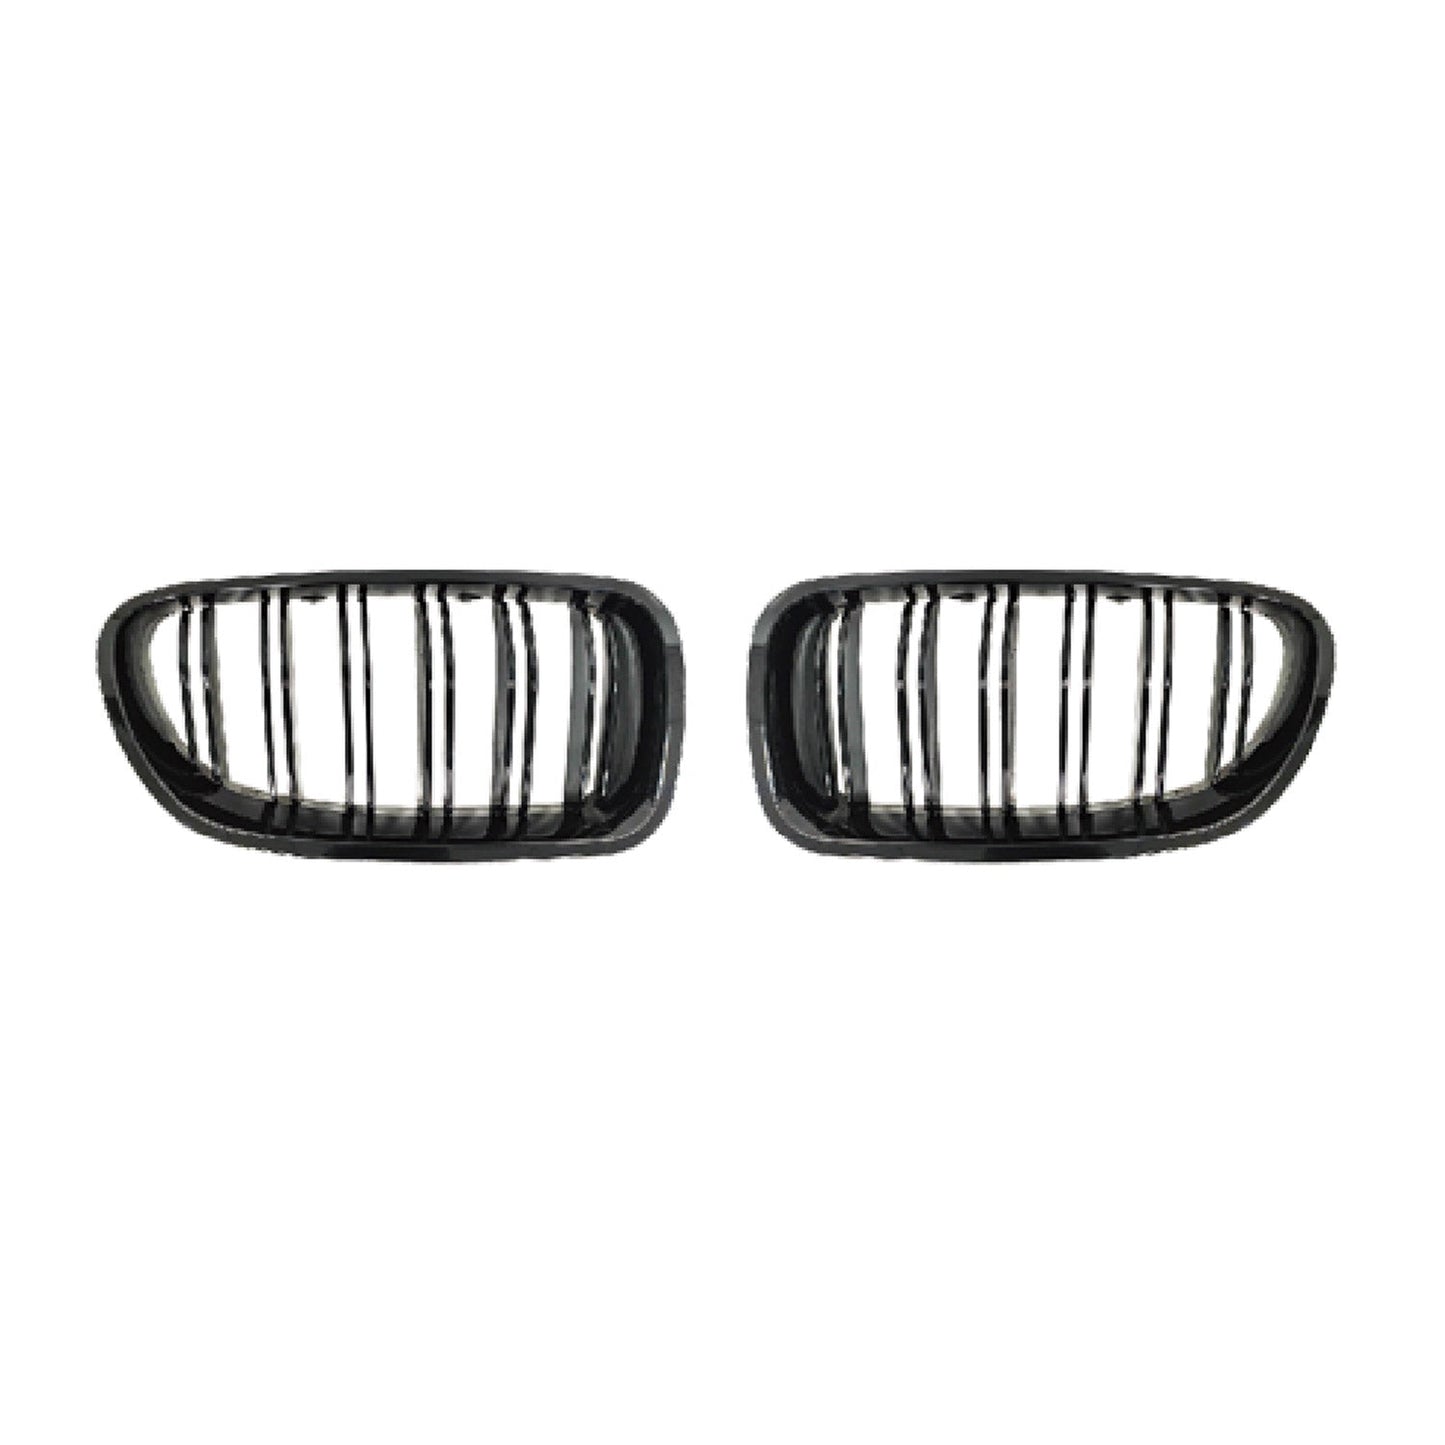 OMAC Front Kidney Grille Grill for BMW 5 Series F10 2011-2017 M-Tech Gloss Black 1218P082MTPB